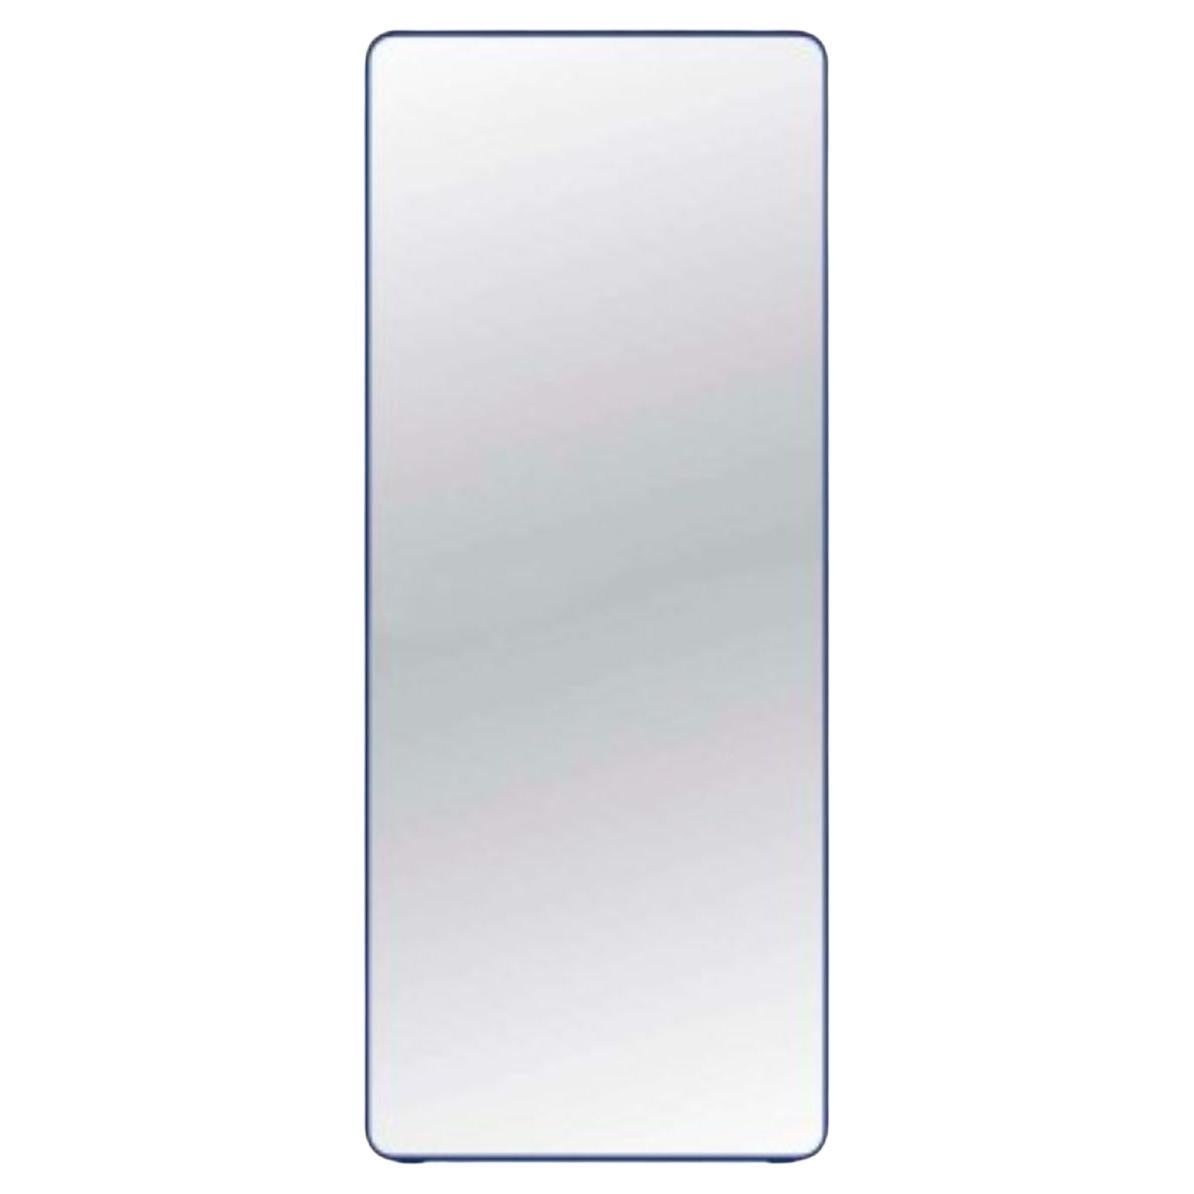 Loveself 05 Mirror by Oito For Sale